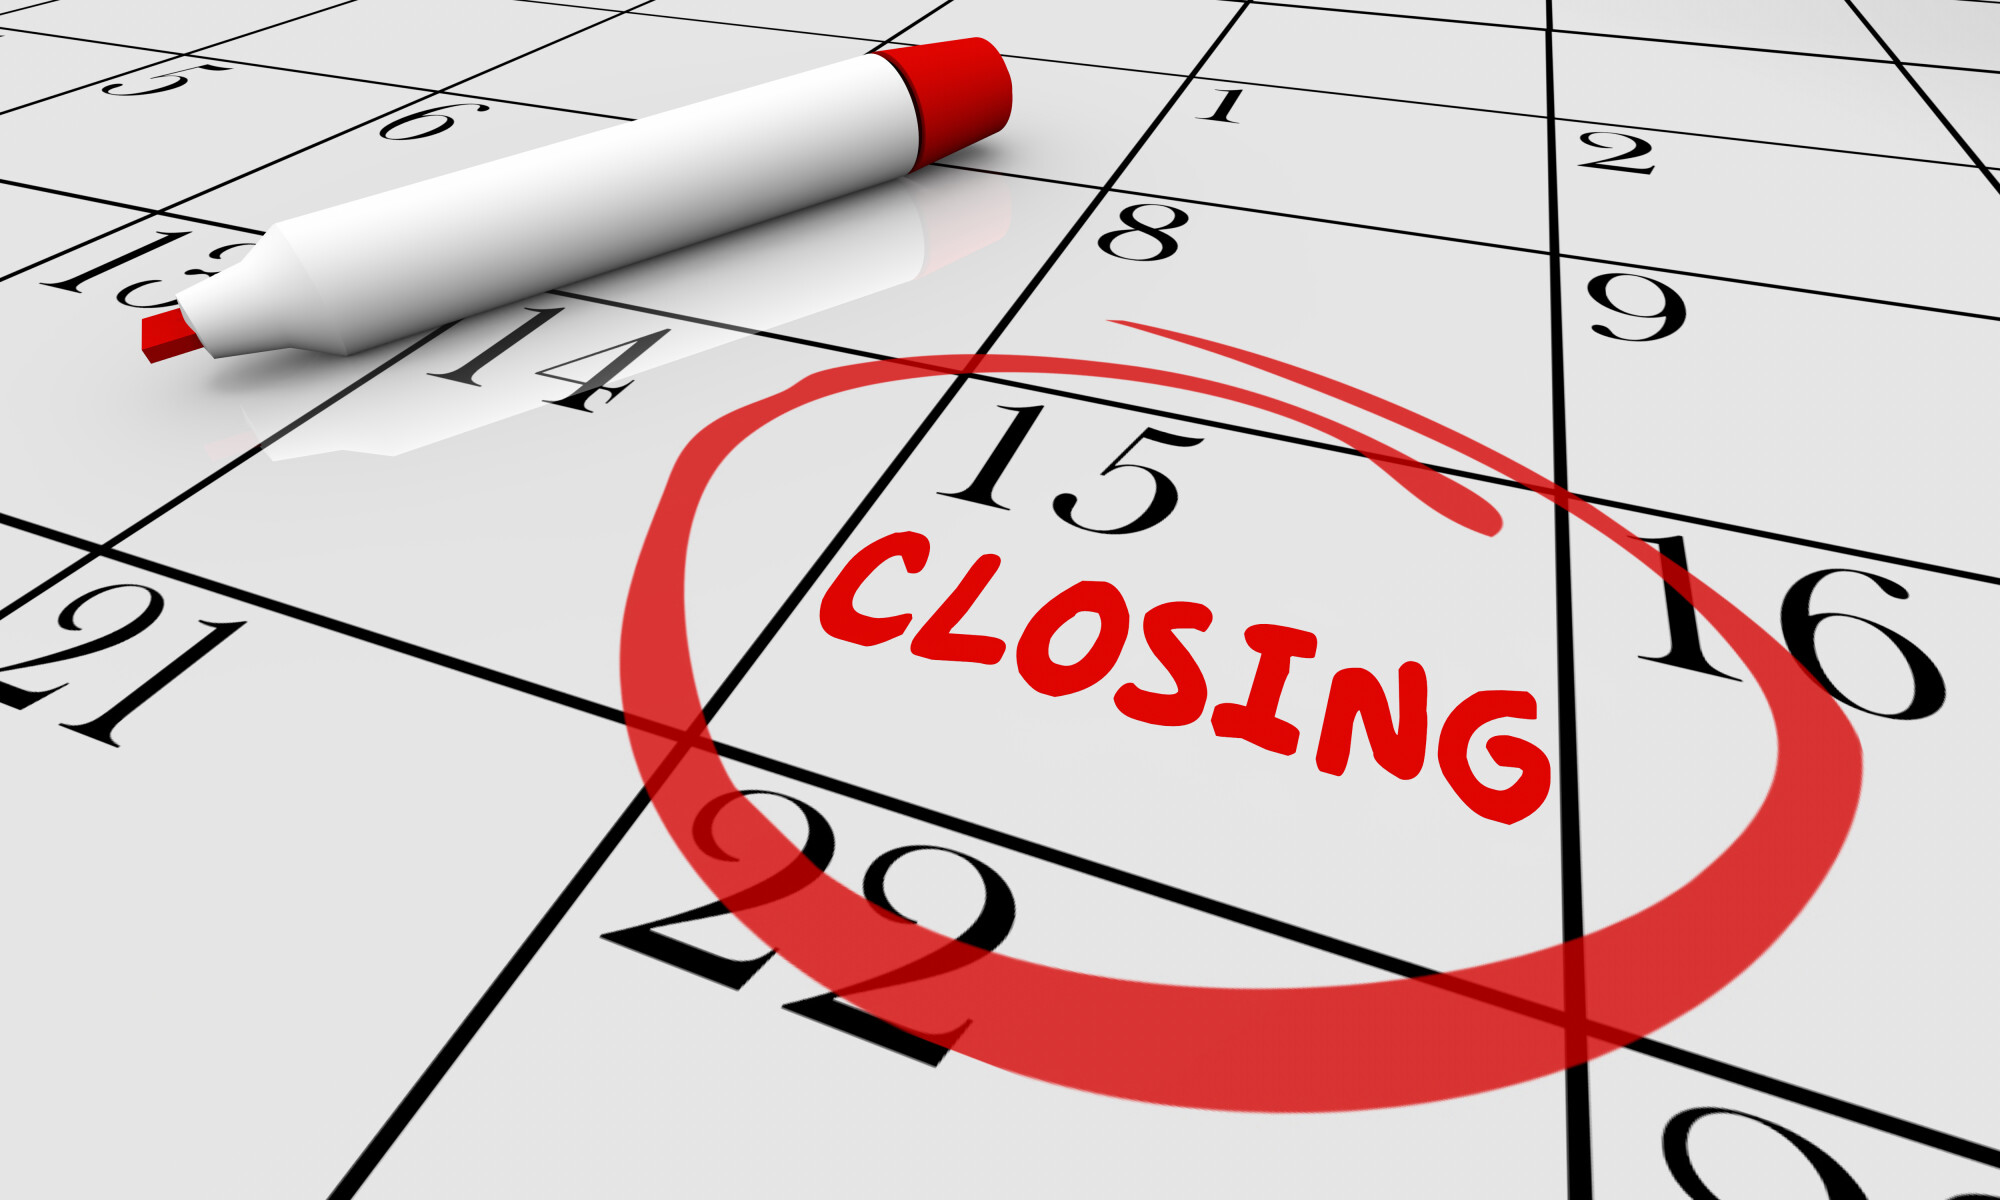 How to Avoid Closing Costs When Selling a Home